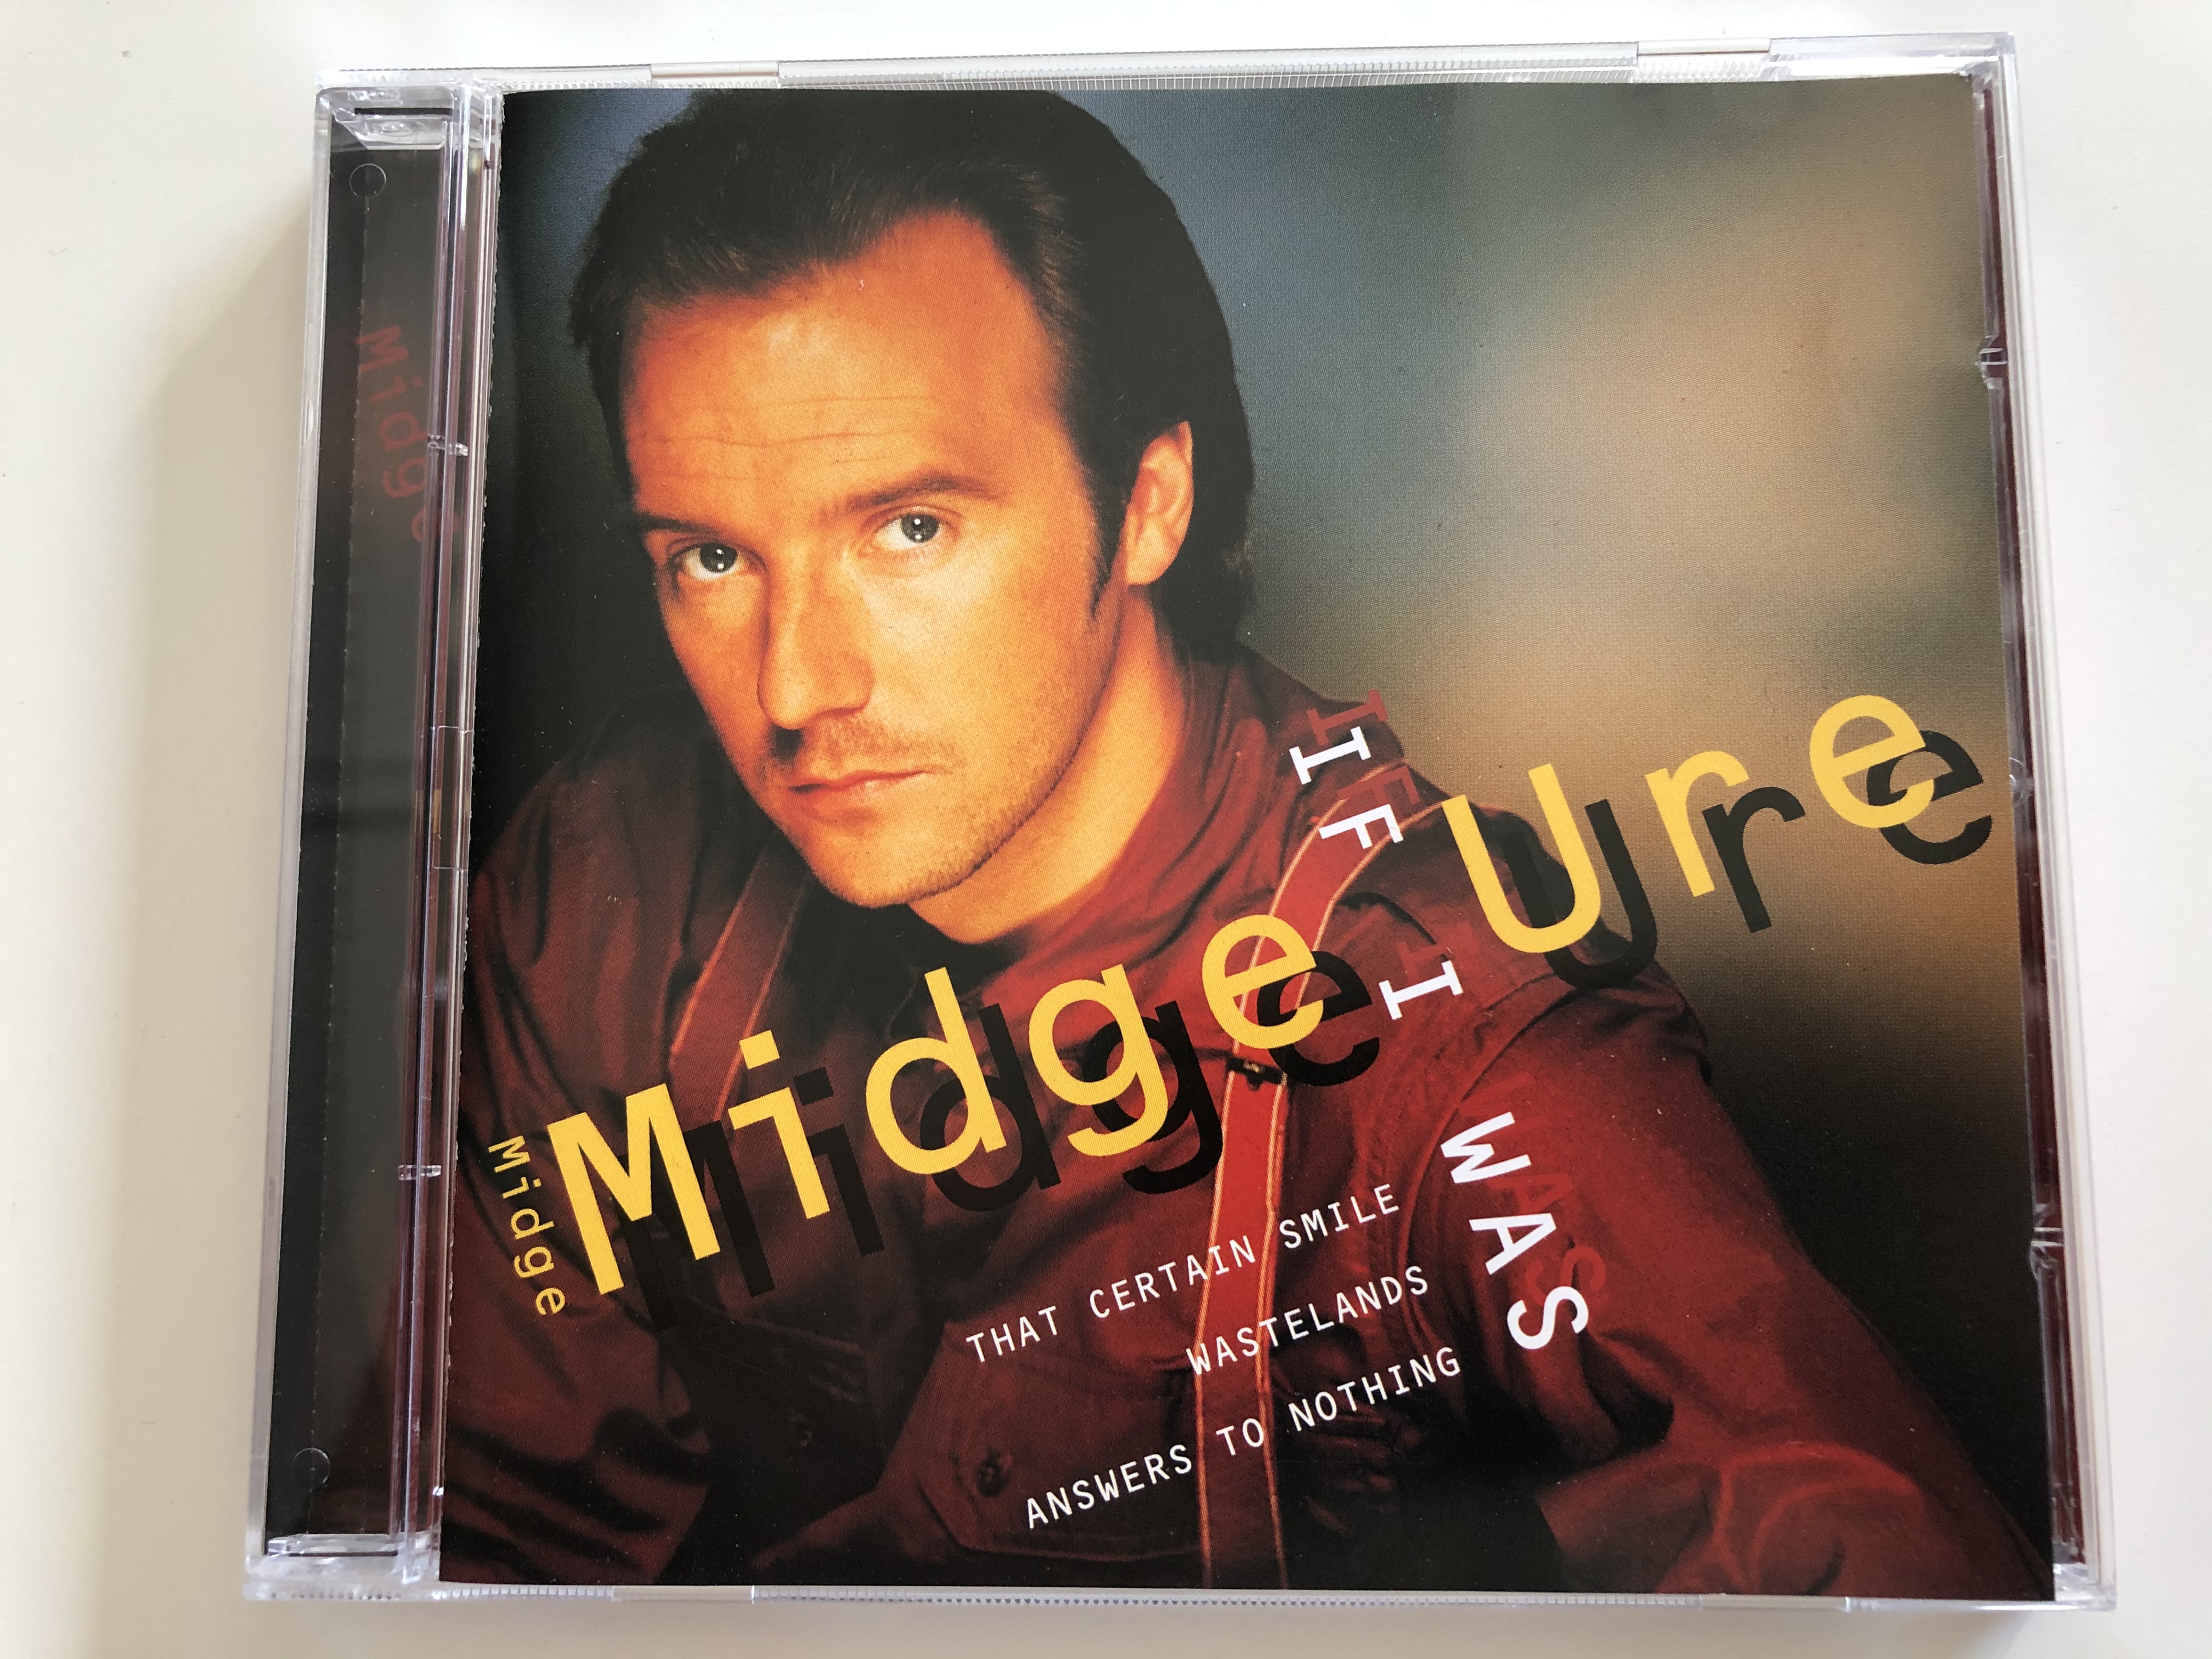 midge-ure-if-i-was-that-certain-smile-wastelands-answers-to-nothing-disky-audio-cd-1997-dc-868792-1-.jpg